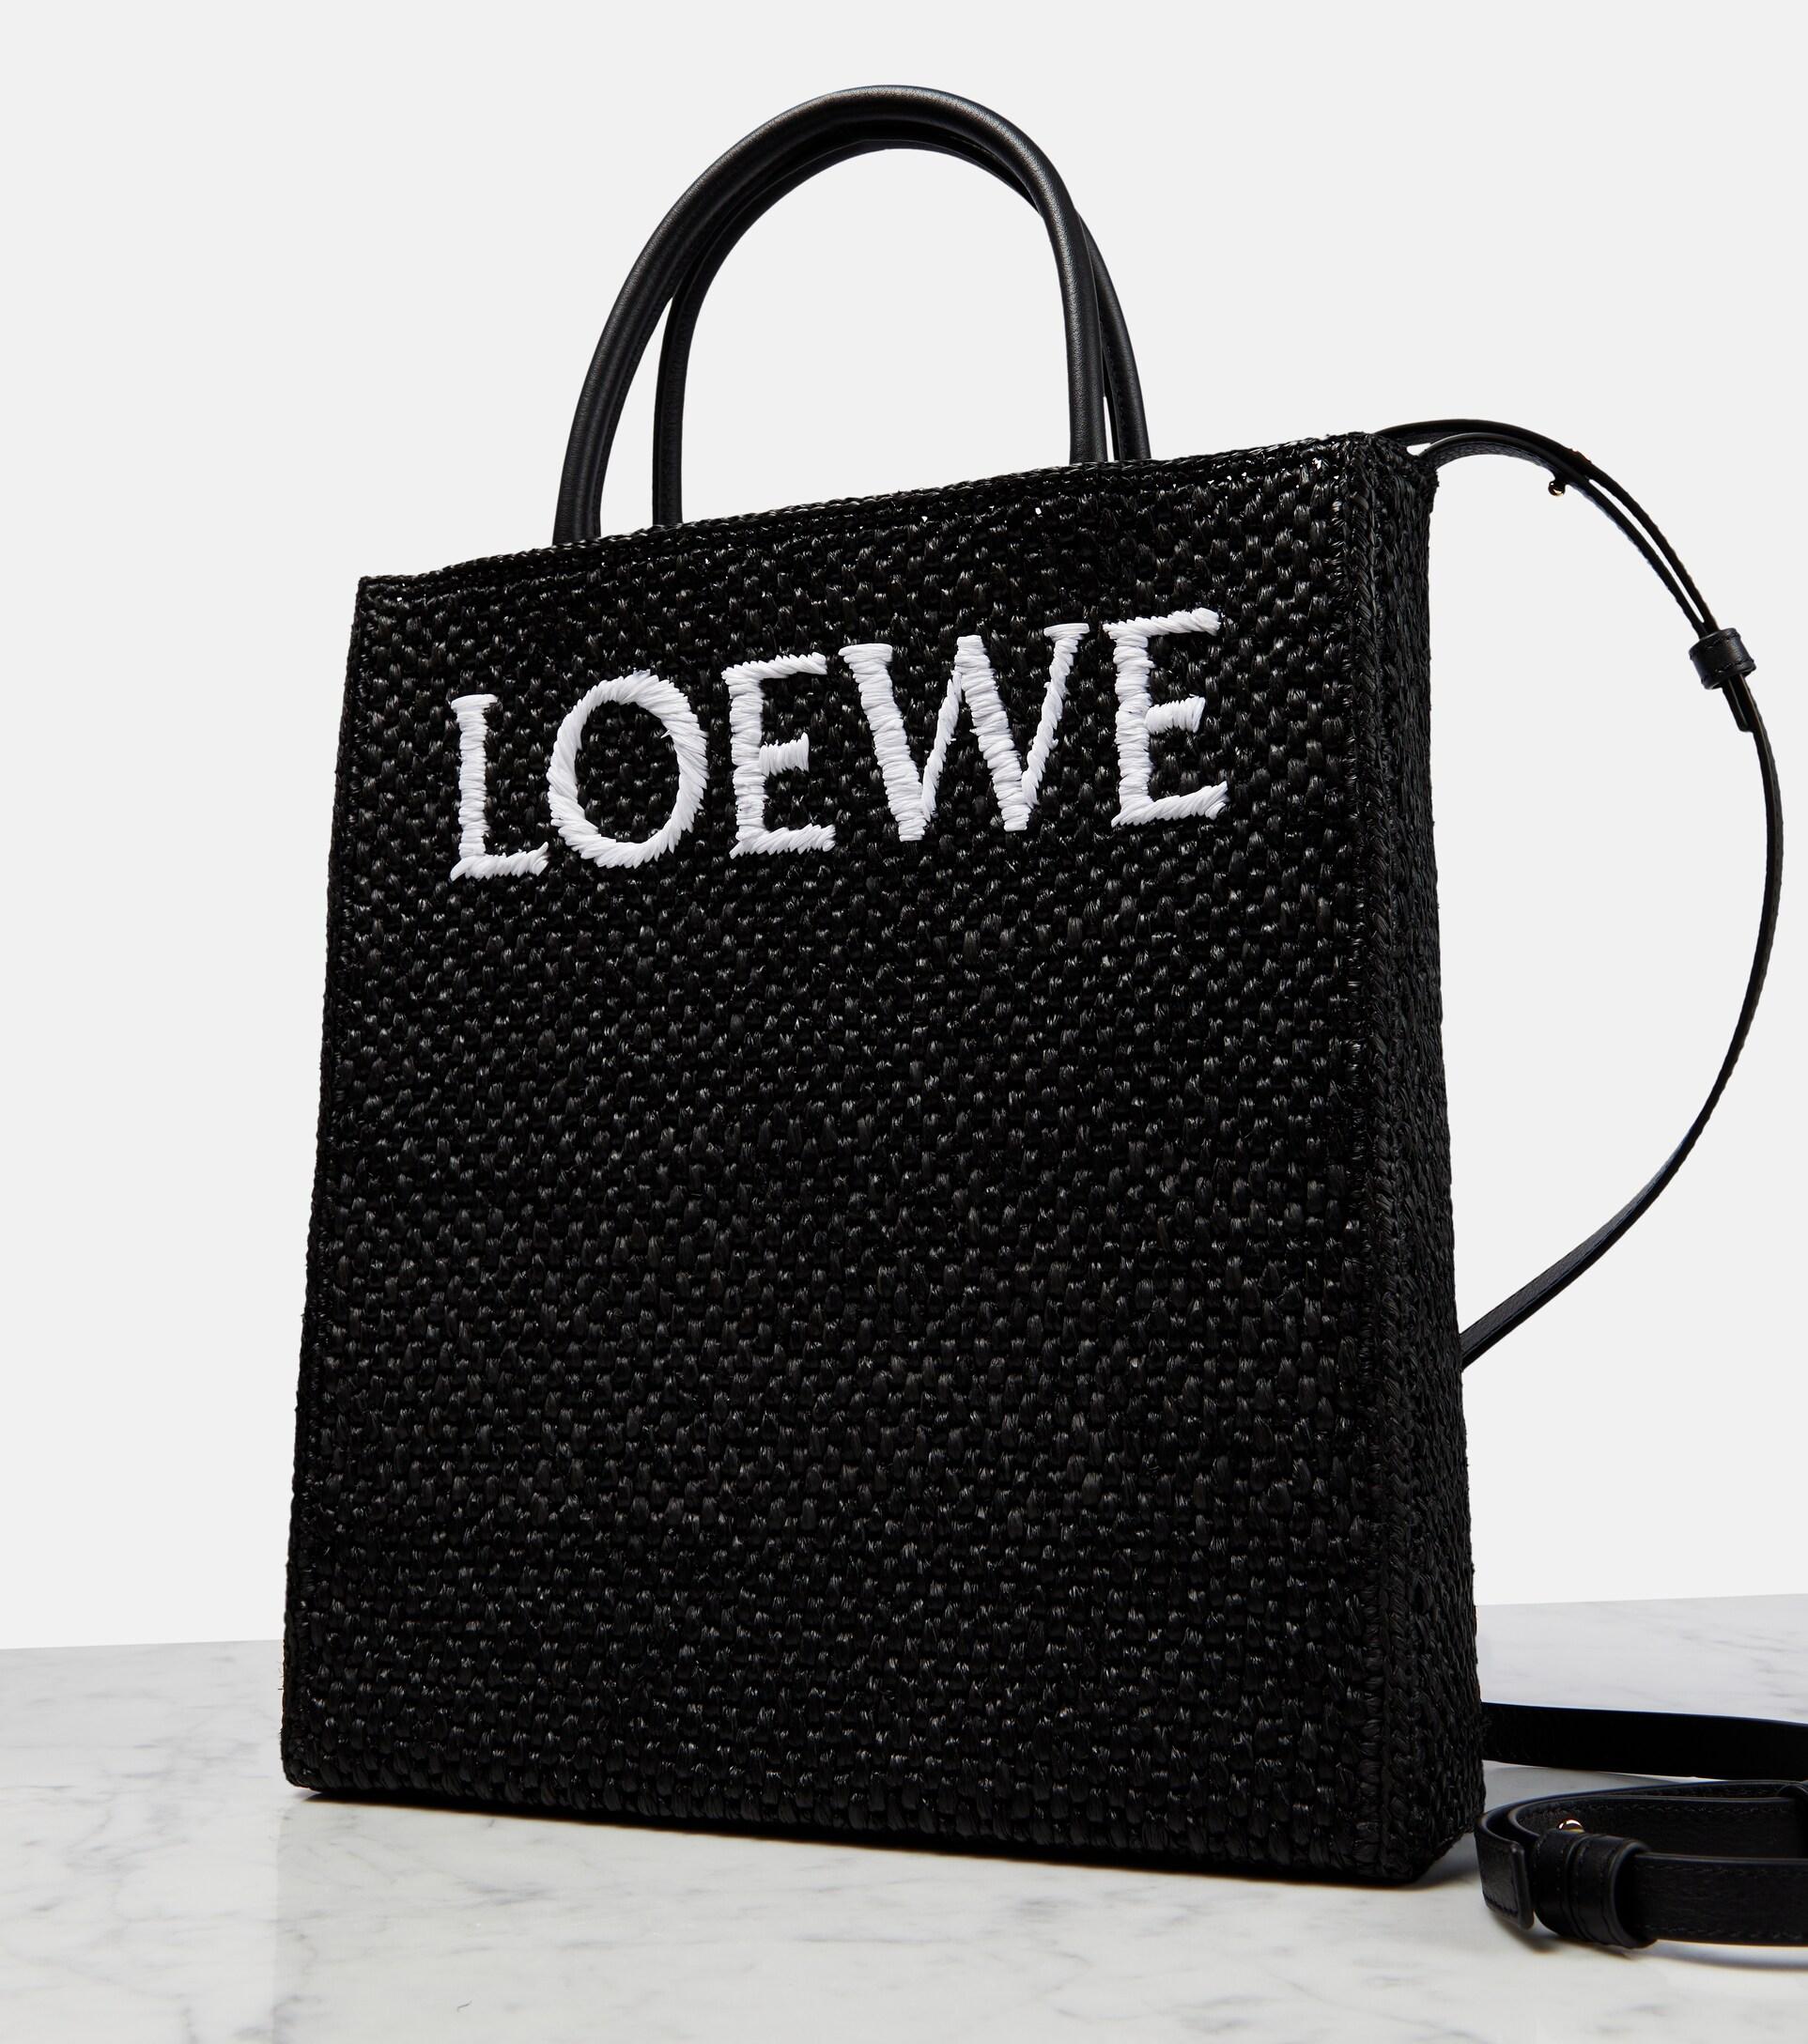 Dadou~Chic: Loewe's Leather-Trimmed Woven Raffia Tote White